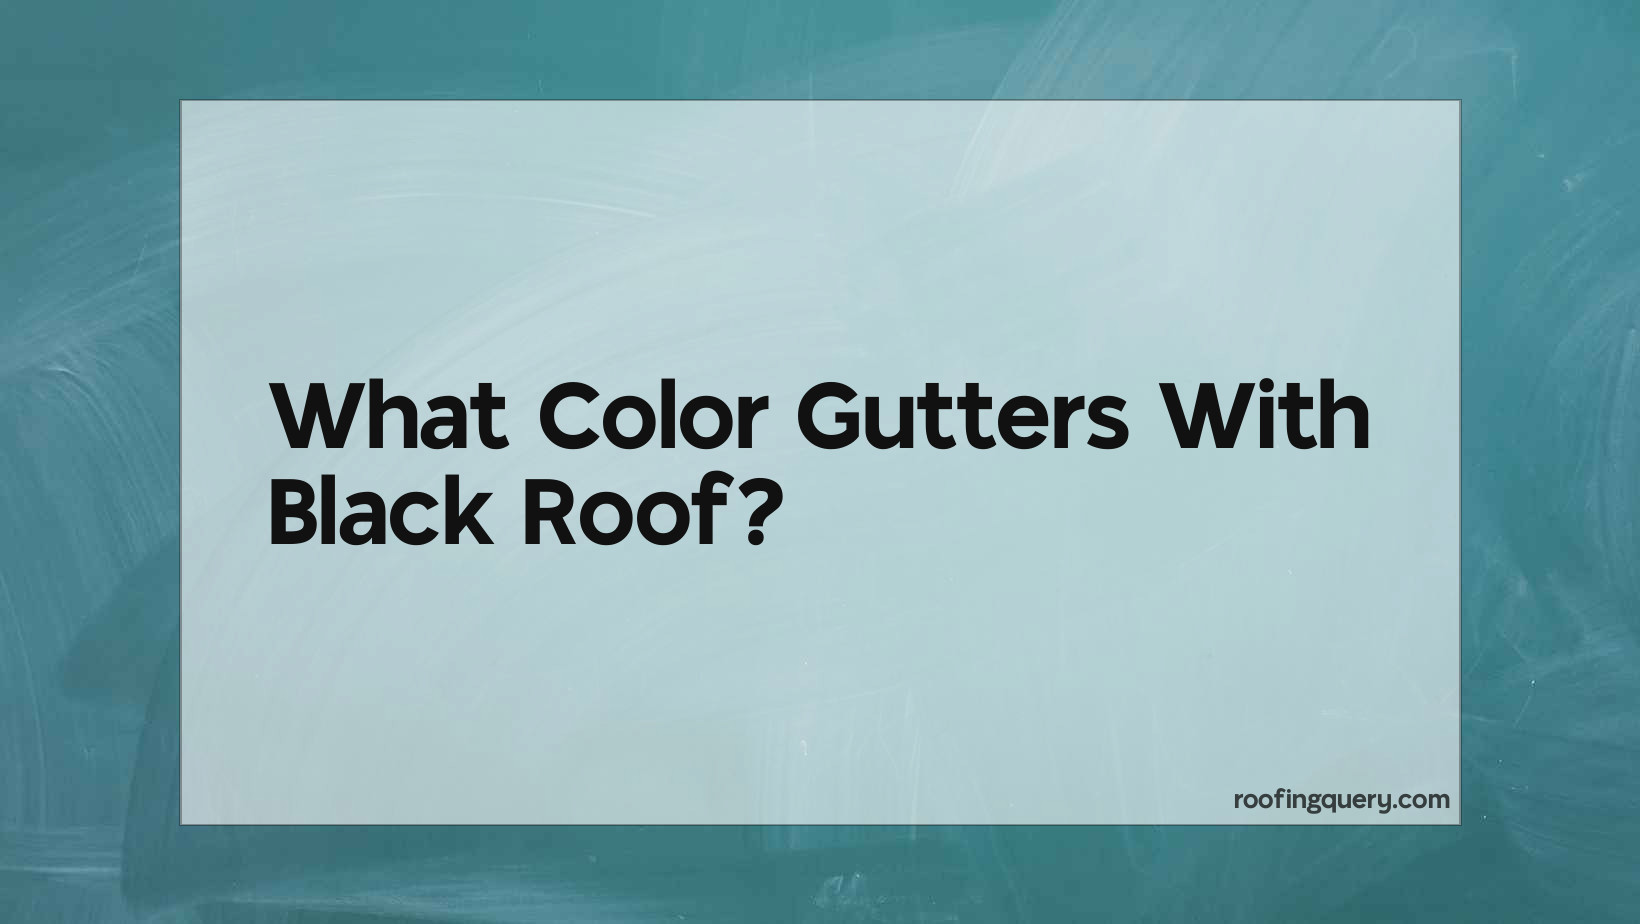 What Color Gutters With Black Roof